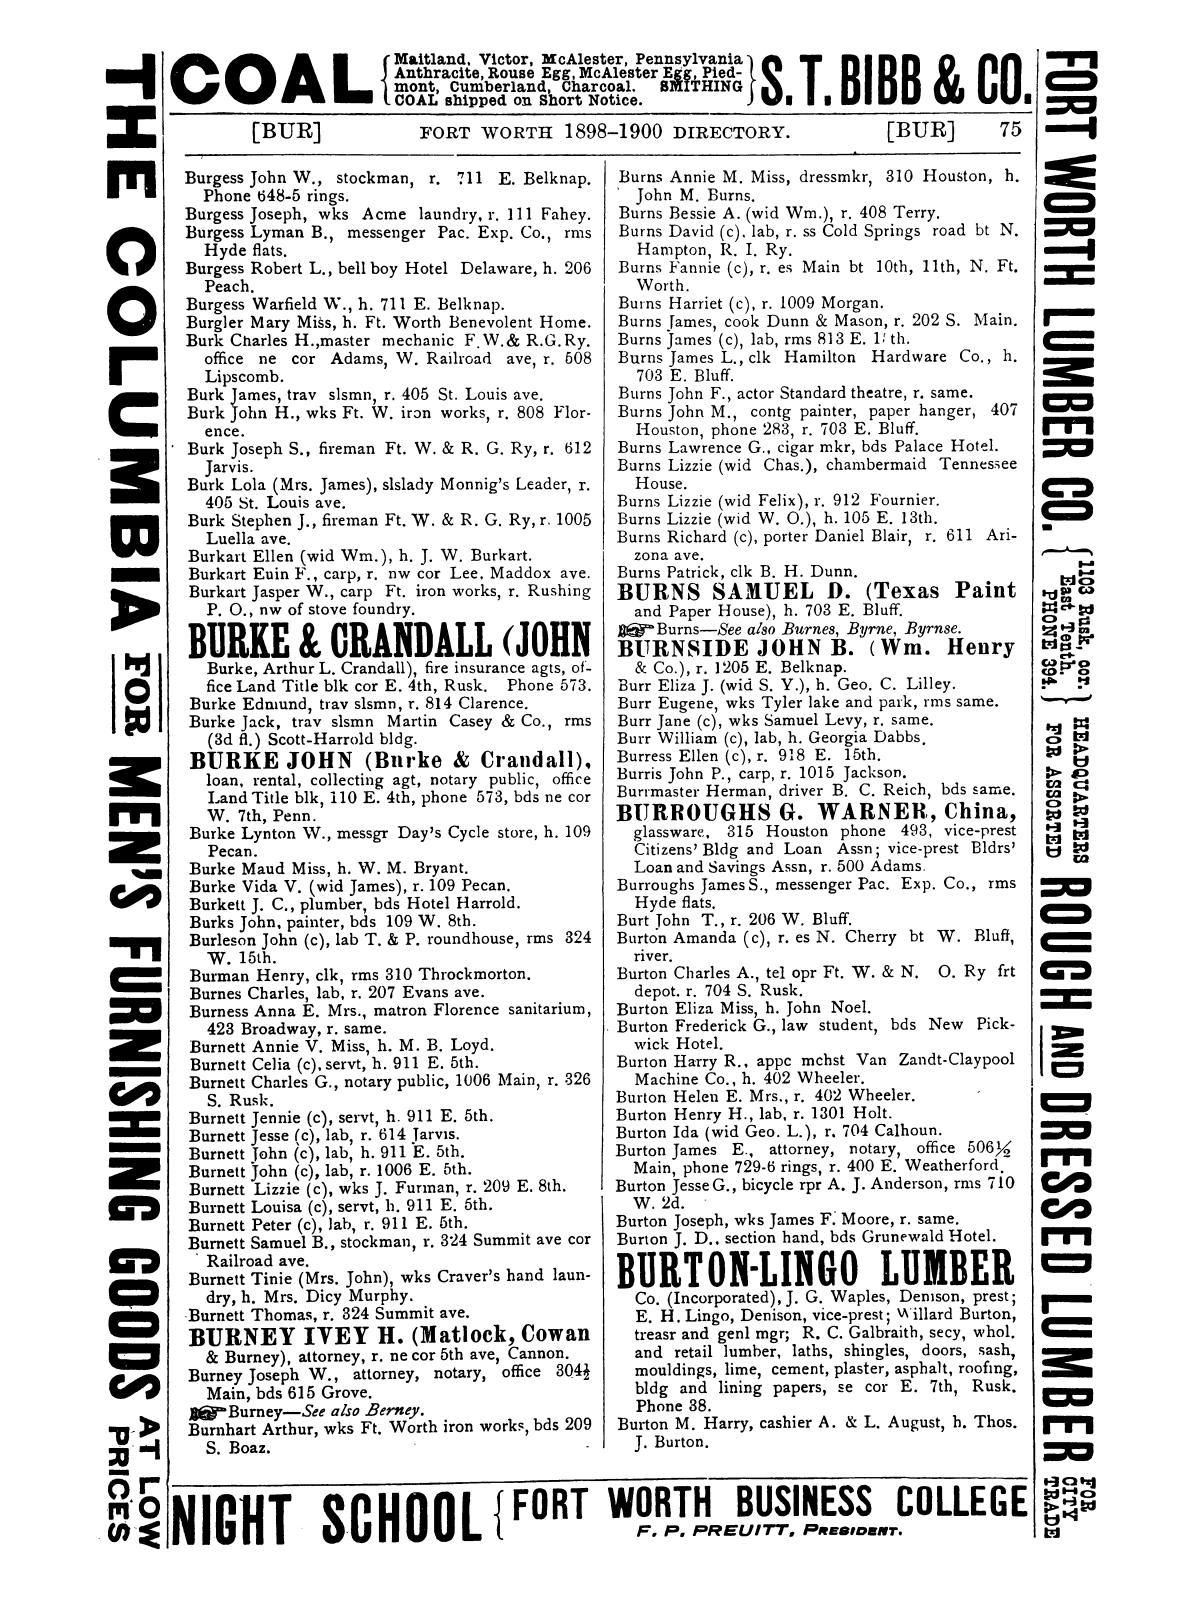 Morrison & Fourmy's General Directory of the City of Fort Worth 1899-1900.
                                                
                                                    75
                                                